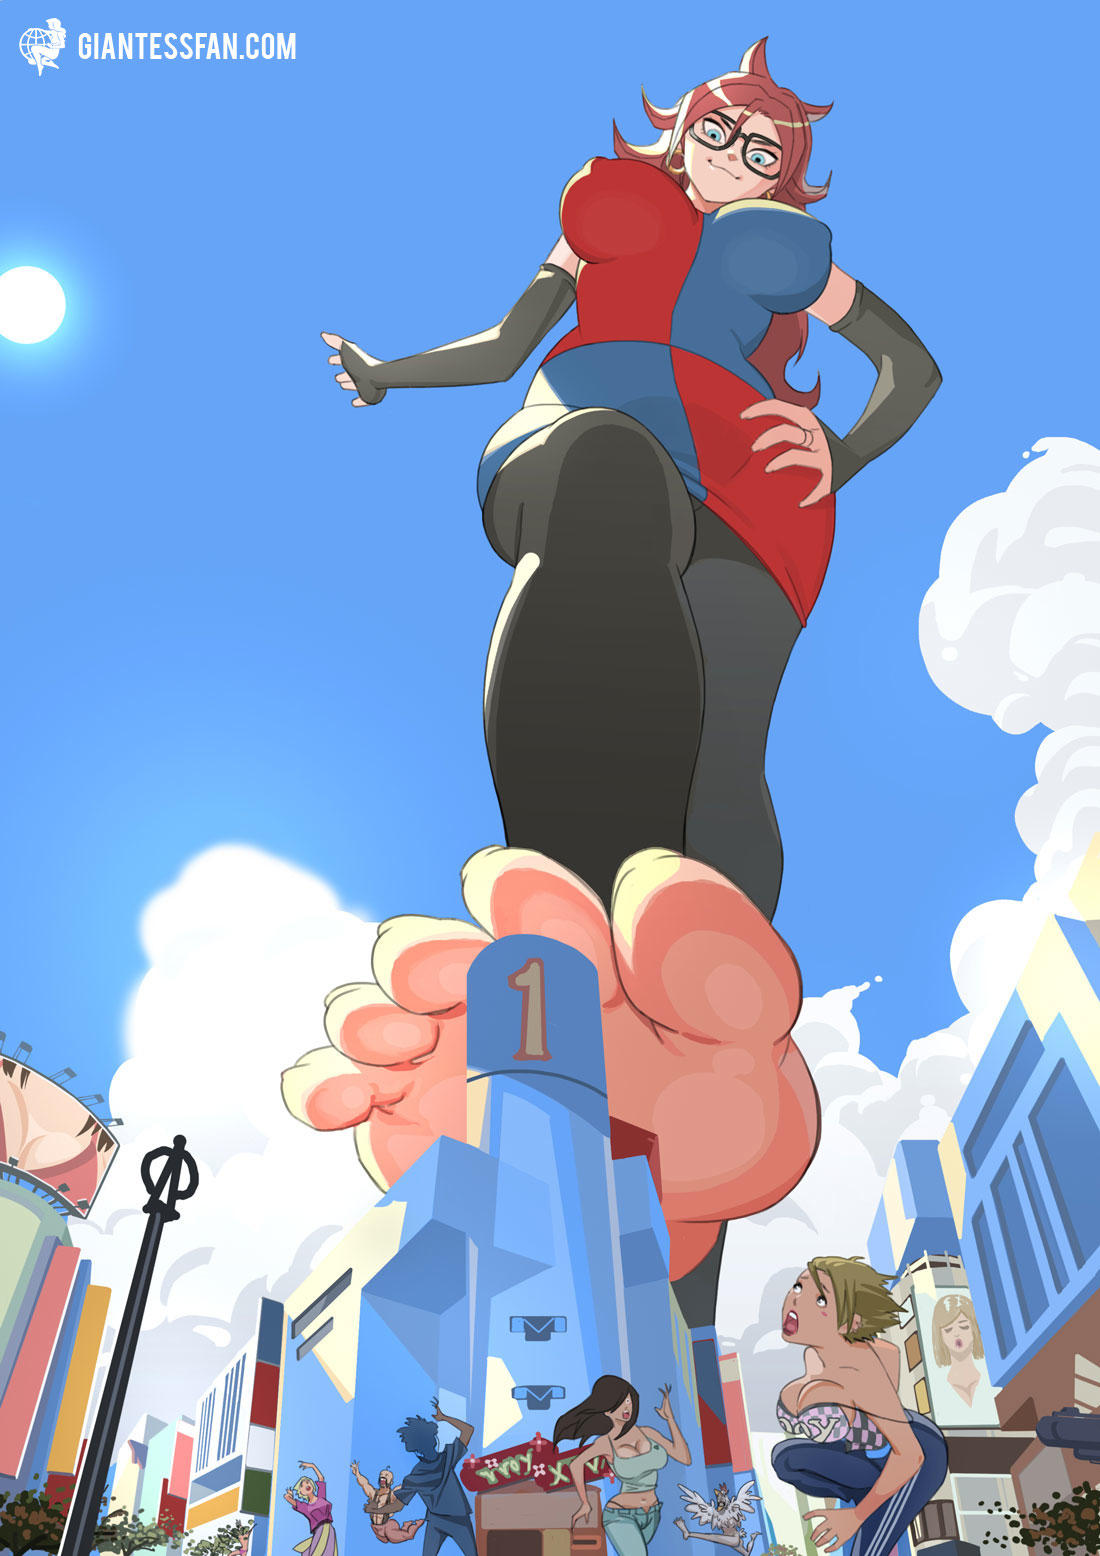 Raven giantess pictures